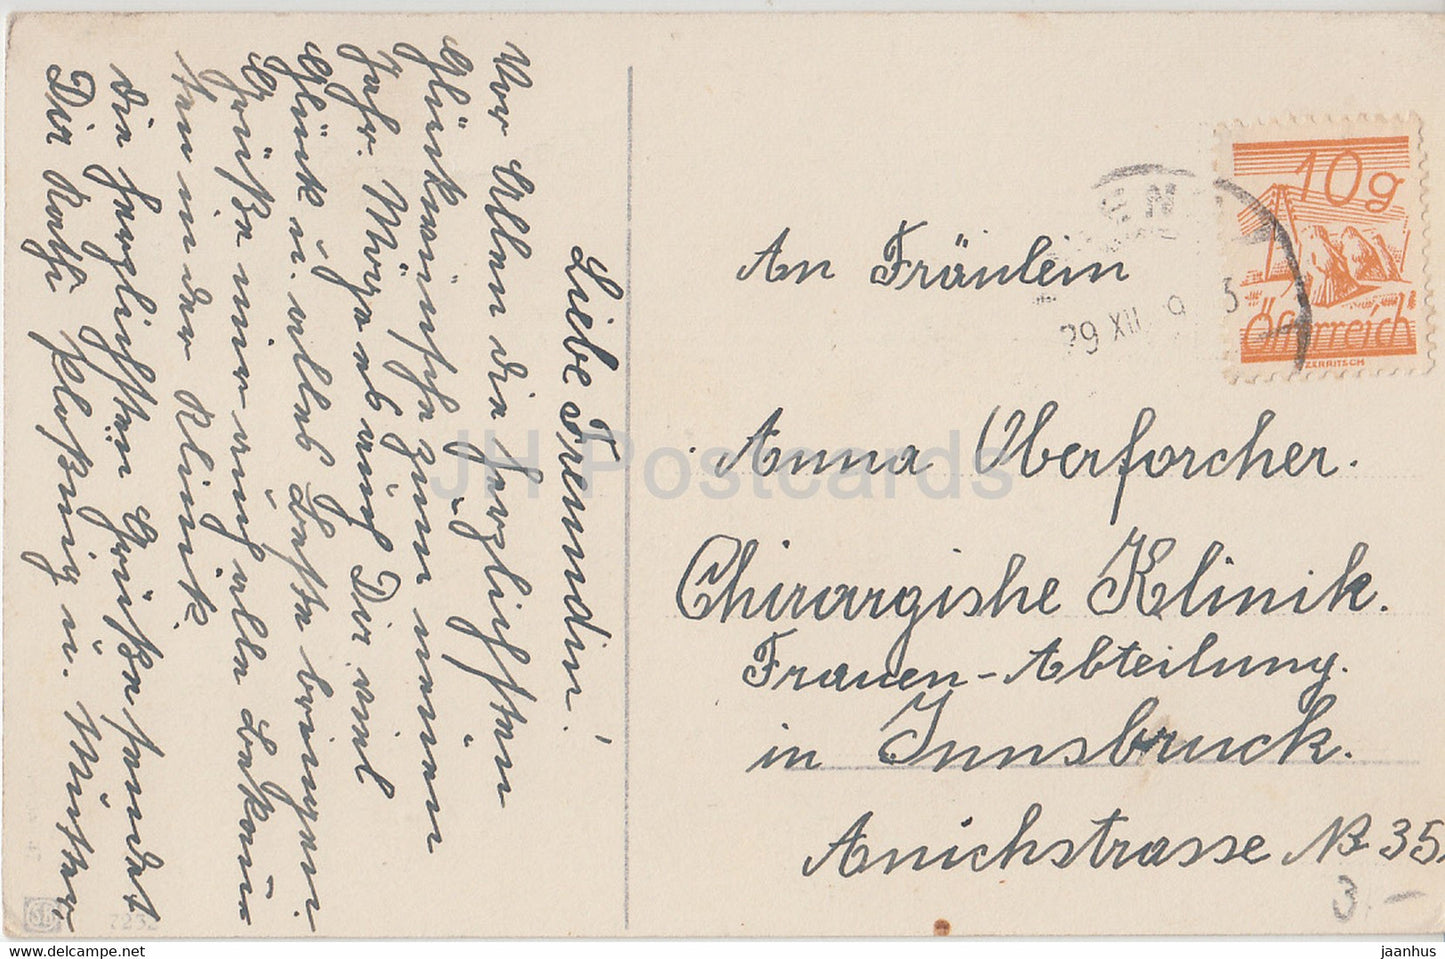 New Year Greeting Card - Ein Frohes Neues Jahr - horseshoe - SB 7232 - old postcard - Germany - used